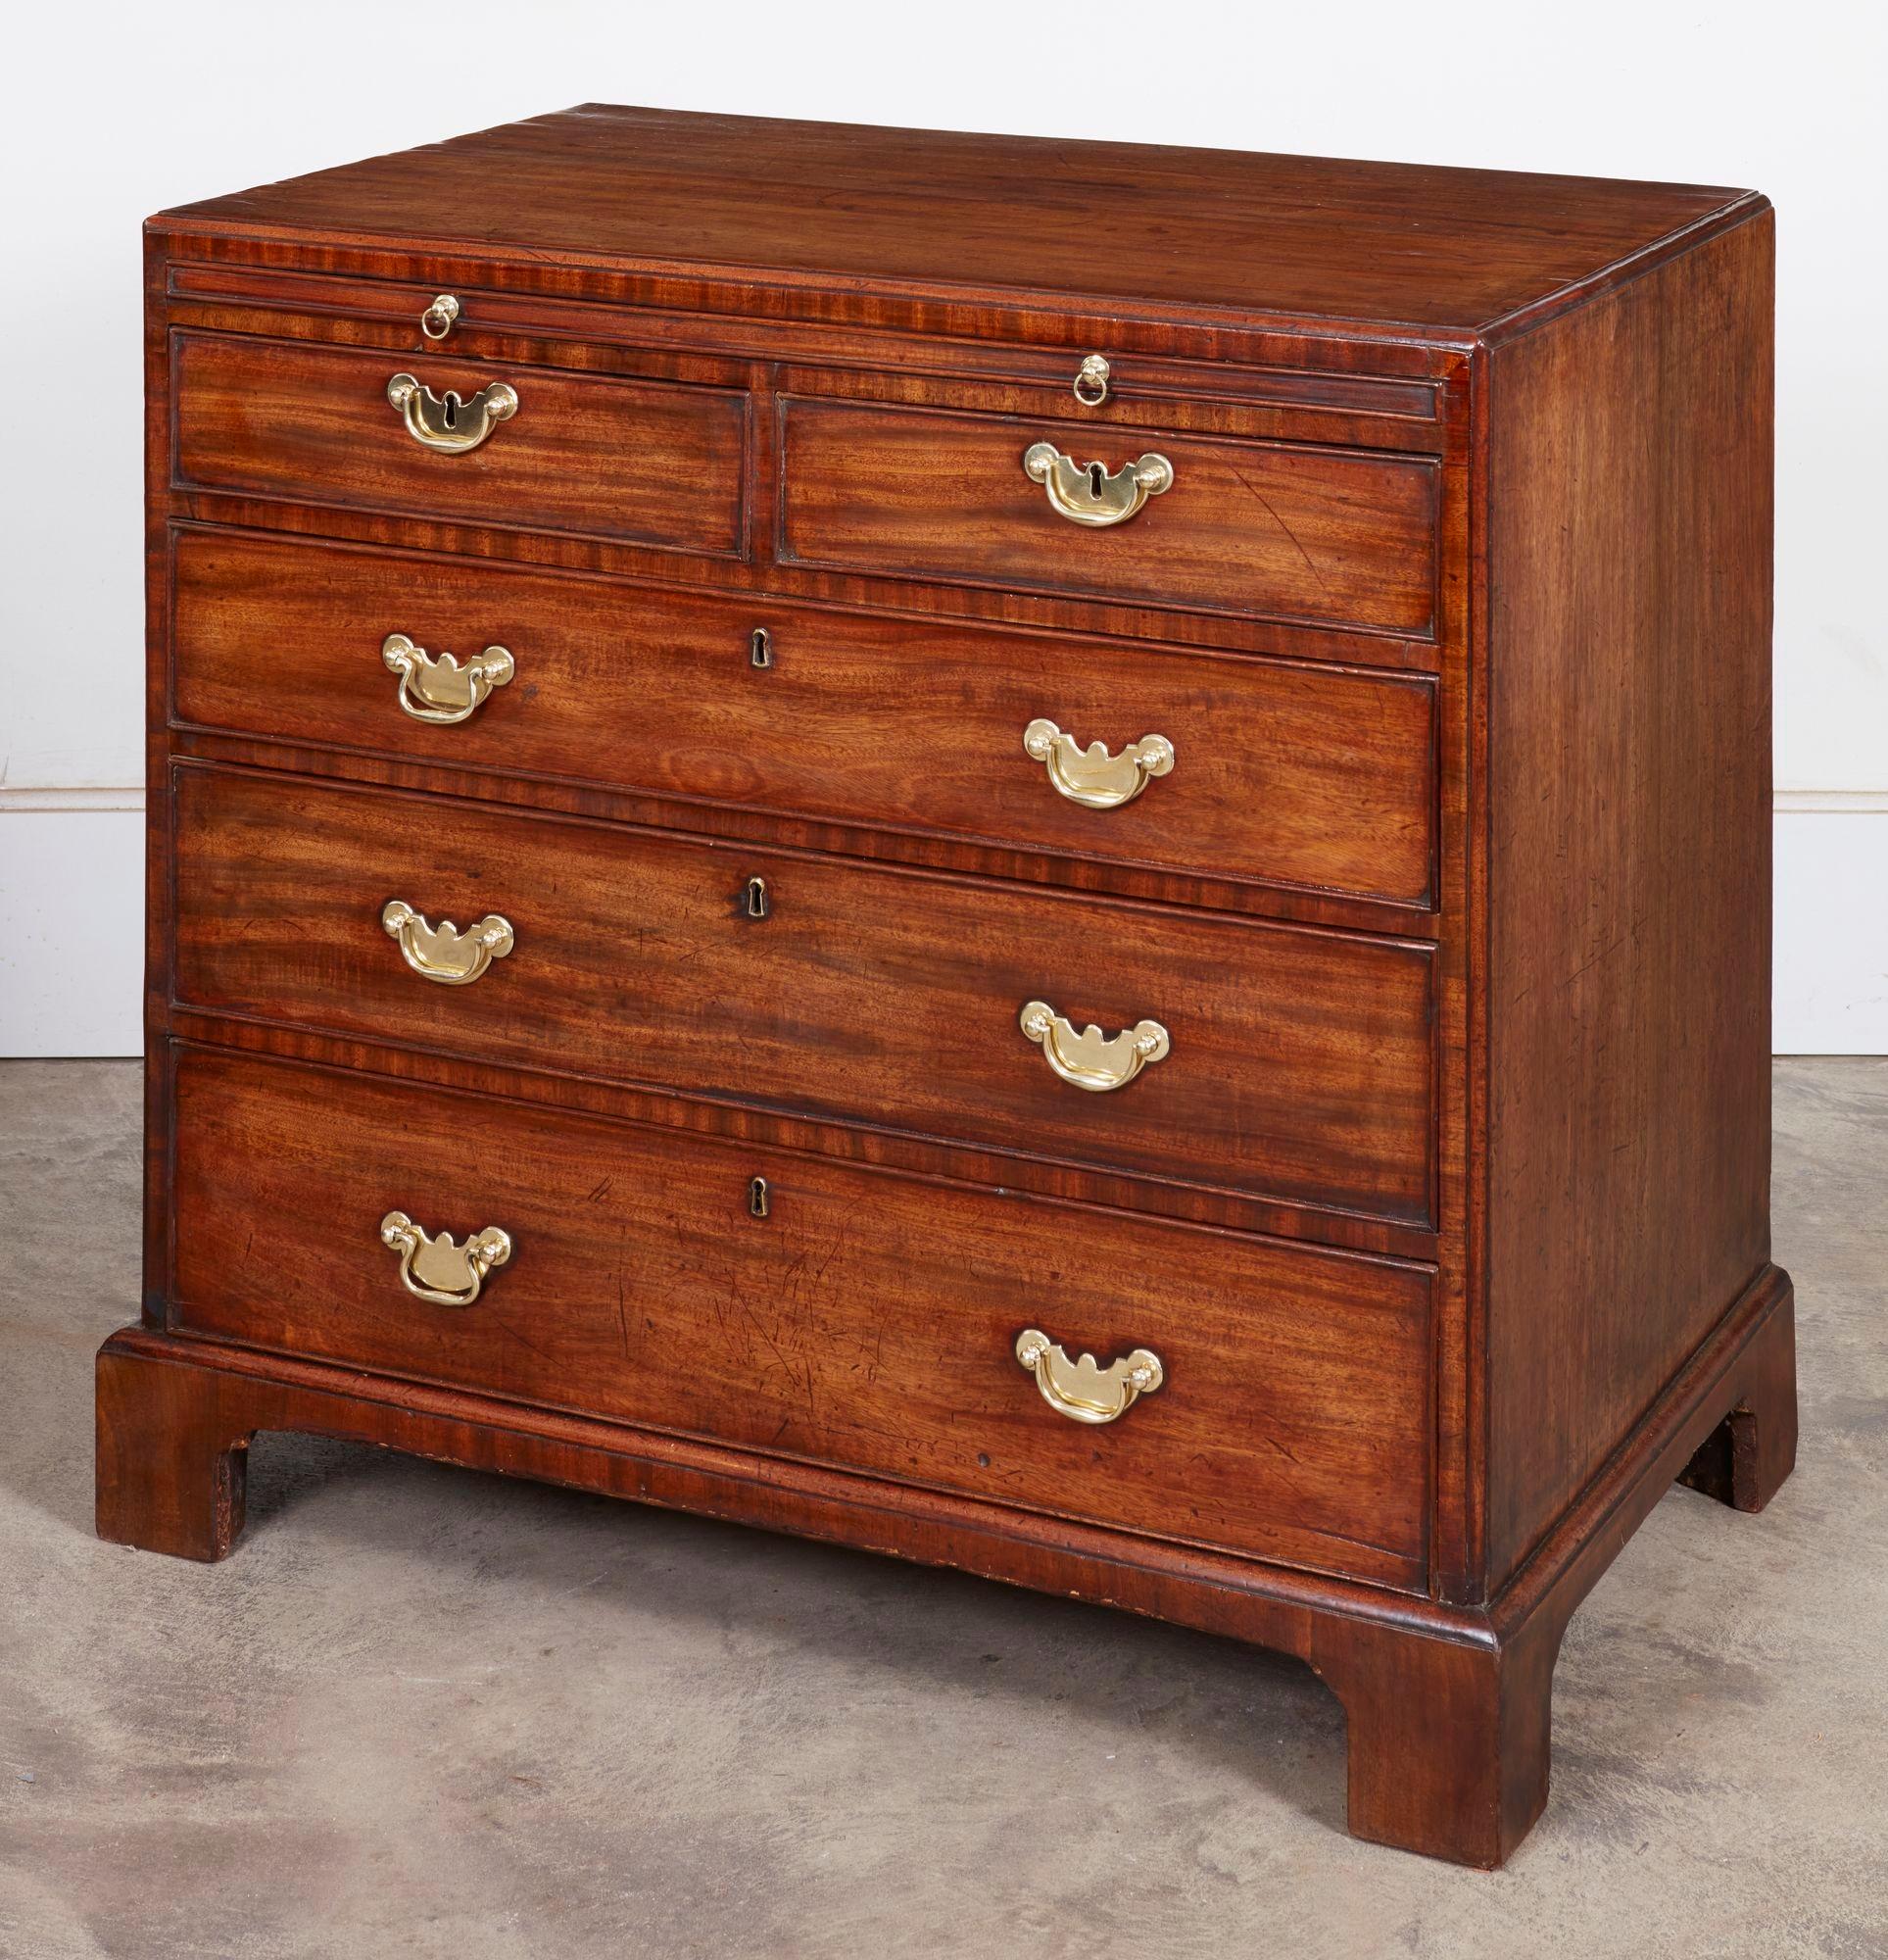 English Georgian Caddy Top Bachelor's Chest For Sale